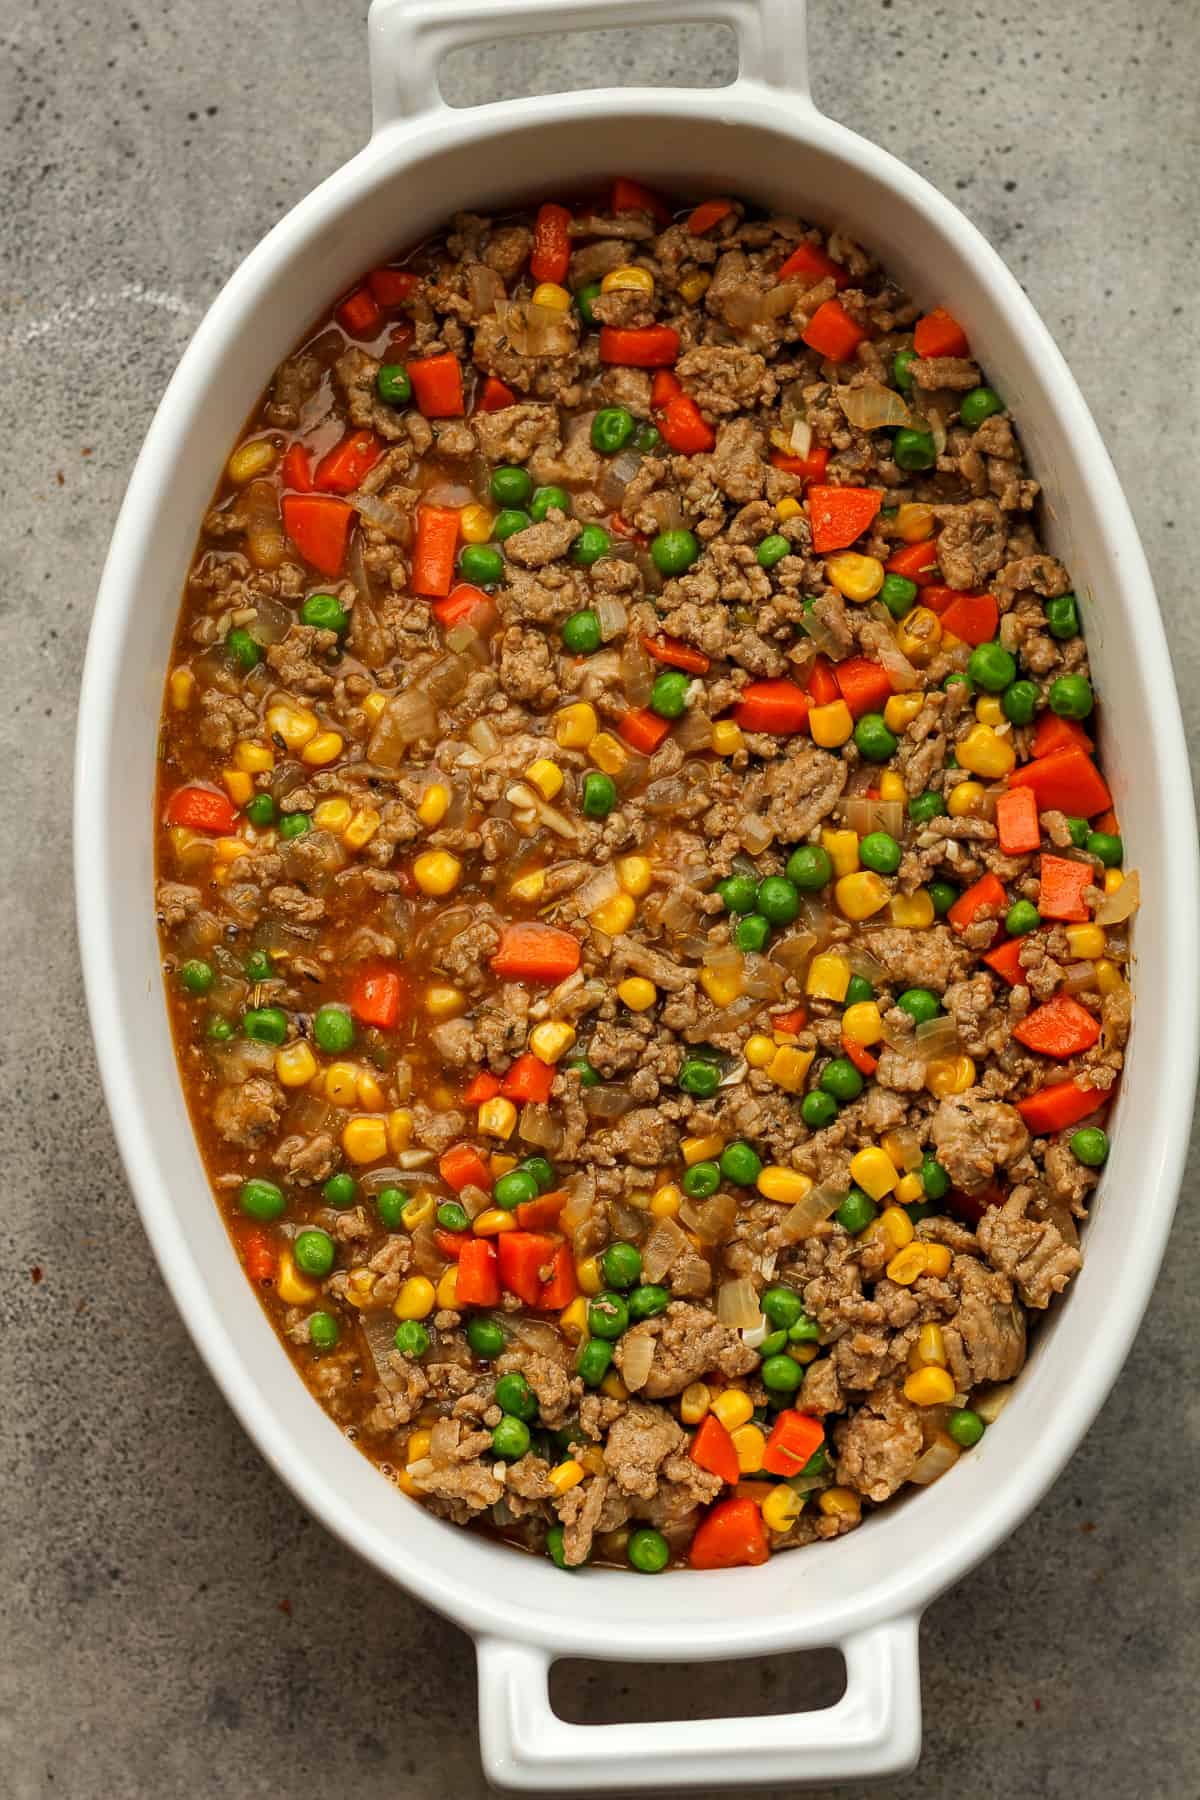 A dish of the ground turkey and veggies in an oblong dish.